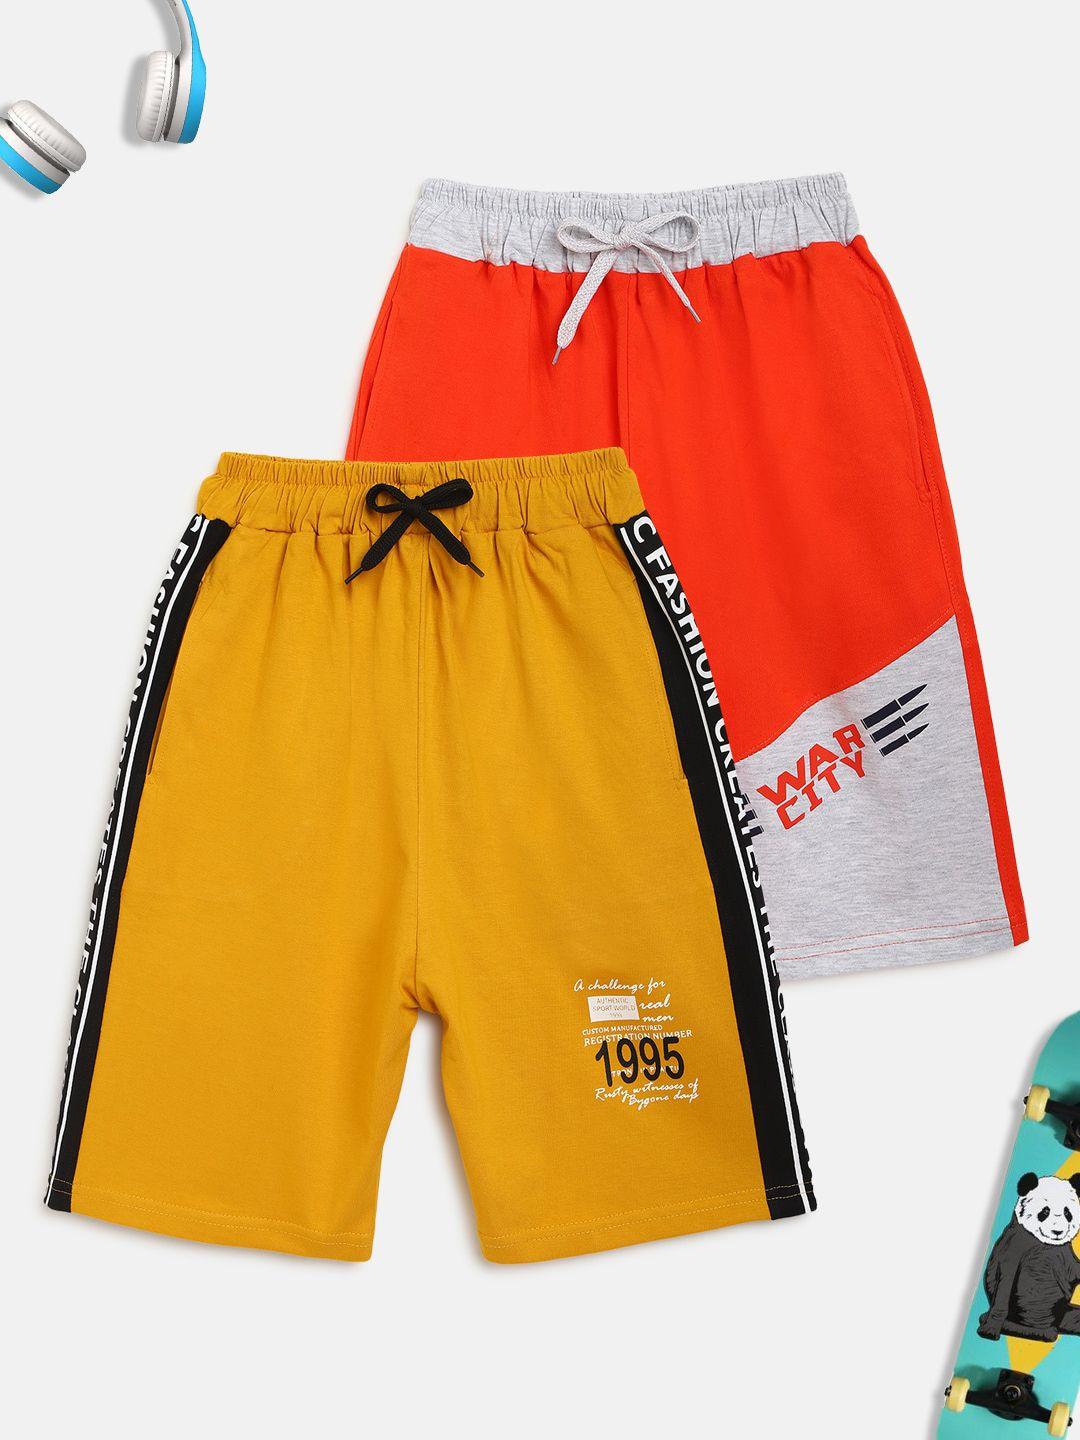 homegrown boys pack of 2 orange & yellow typography printed shorts